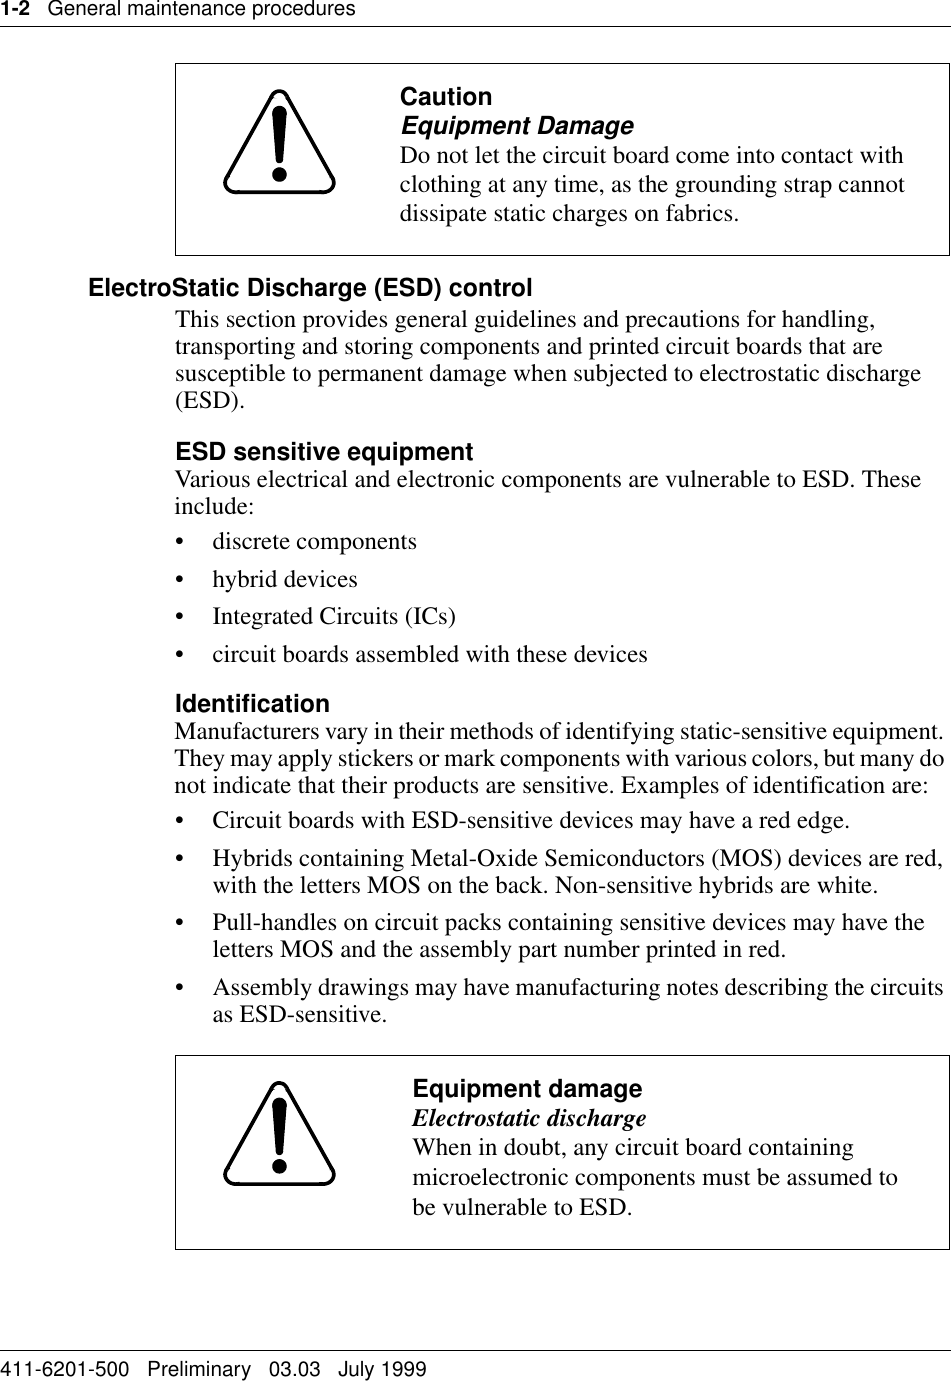 1-2   General maintenance procedures411-6201-500   Preliminary   03.03   July 1999 ElectroStatic Discharge (ESD) controlThis section provides general guidelines and precautions for handling, transporting and storing components and printed circuit boards that are susceptible to permanent damage when subjected to electrostatic discharge (ESD).ESD sensitive equipmentVarious electrical and electronic components are vulnerable to ESD. These include:• discrete components• hybrid devices• Integrated Circuits (ICs)• circuit boards assembled with these devicesIdentificationManufacturers vary in their methods of identifying static-sensitive equipment. They may apply stickers or mark components with various colors, but many do not indicate that their products are sensitive. Examples of identification are:• Circuit boards with ESD-sensitive devices may have a red edge.• Hybrids containing Metal-Oxide Semiconductors (MOS) devices are red, with the letters MOS on the back. Non-sensitive hybrids are white.• Pull-handles on circuit packs containing sensitive devices may have the letters MOS and the assembly part number printed in red.• Assembly drawings may have manufacturing notes describing the circuits as ESD-sensitive.CautionEquipment DamageDo not let the circuit board come into contact with clothing at any time, as the grounding strap cannot dissipate static charges on fabrics.Equipment damageElectrostatic dischargeWhen in doubt, any circuit board containing microelectronic components must be assumed to be vulnerable to ESD.